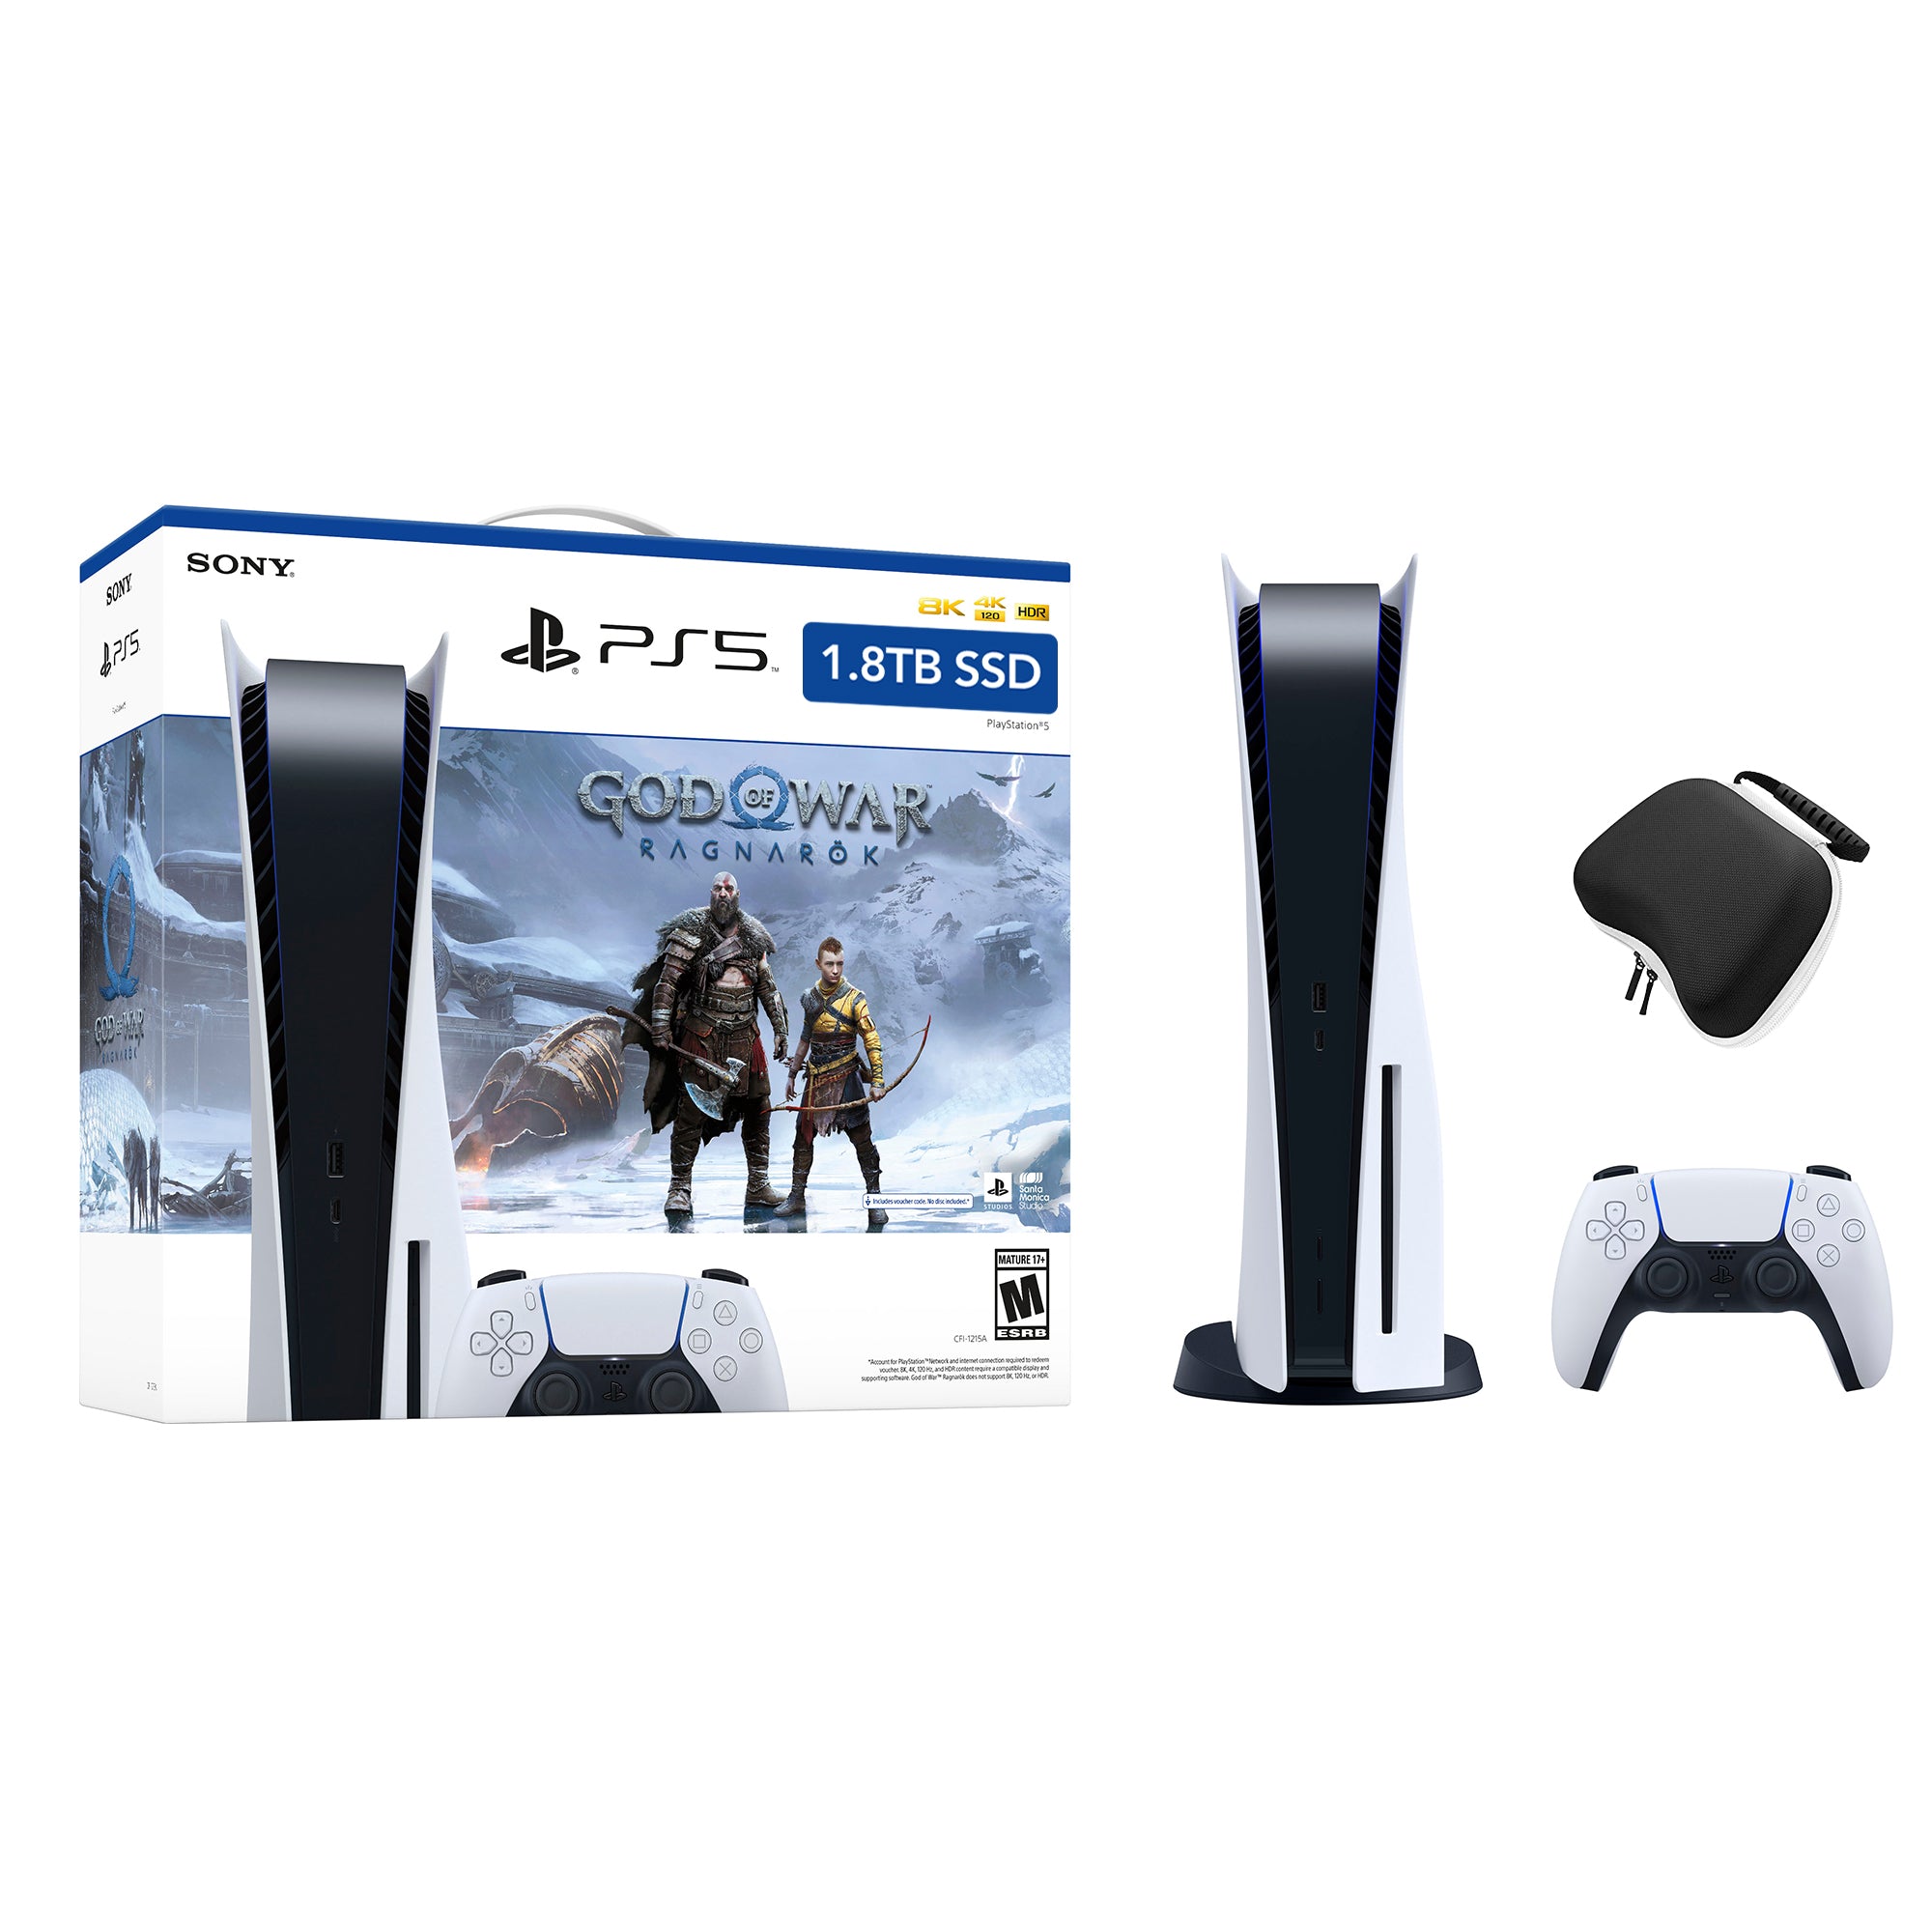 PlayStation 5 Upgraded 1.8TB Disc Edition God of War Ragnarok Bundle and Mytrix Controller Case - White, PS5 Gaming Console